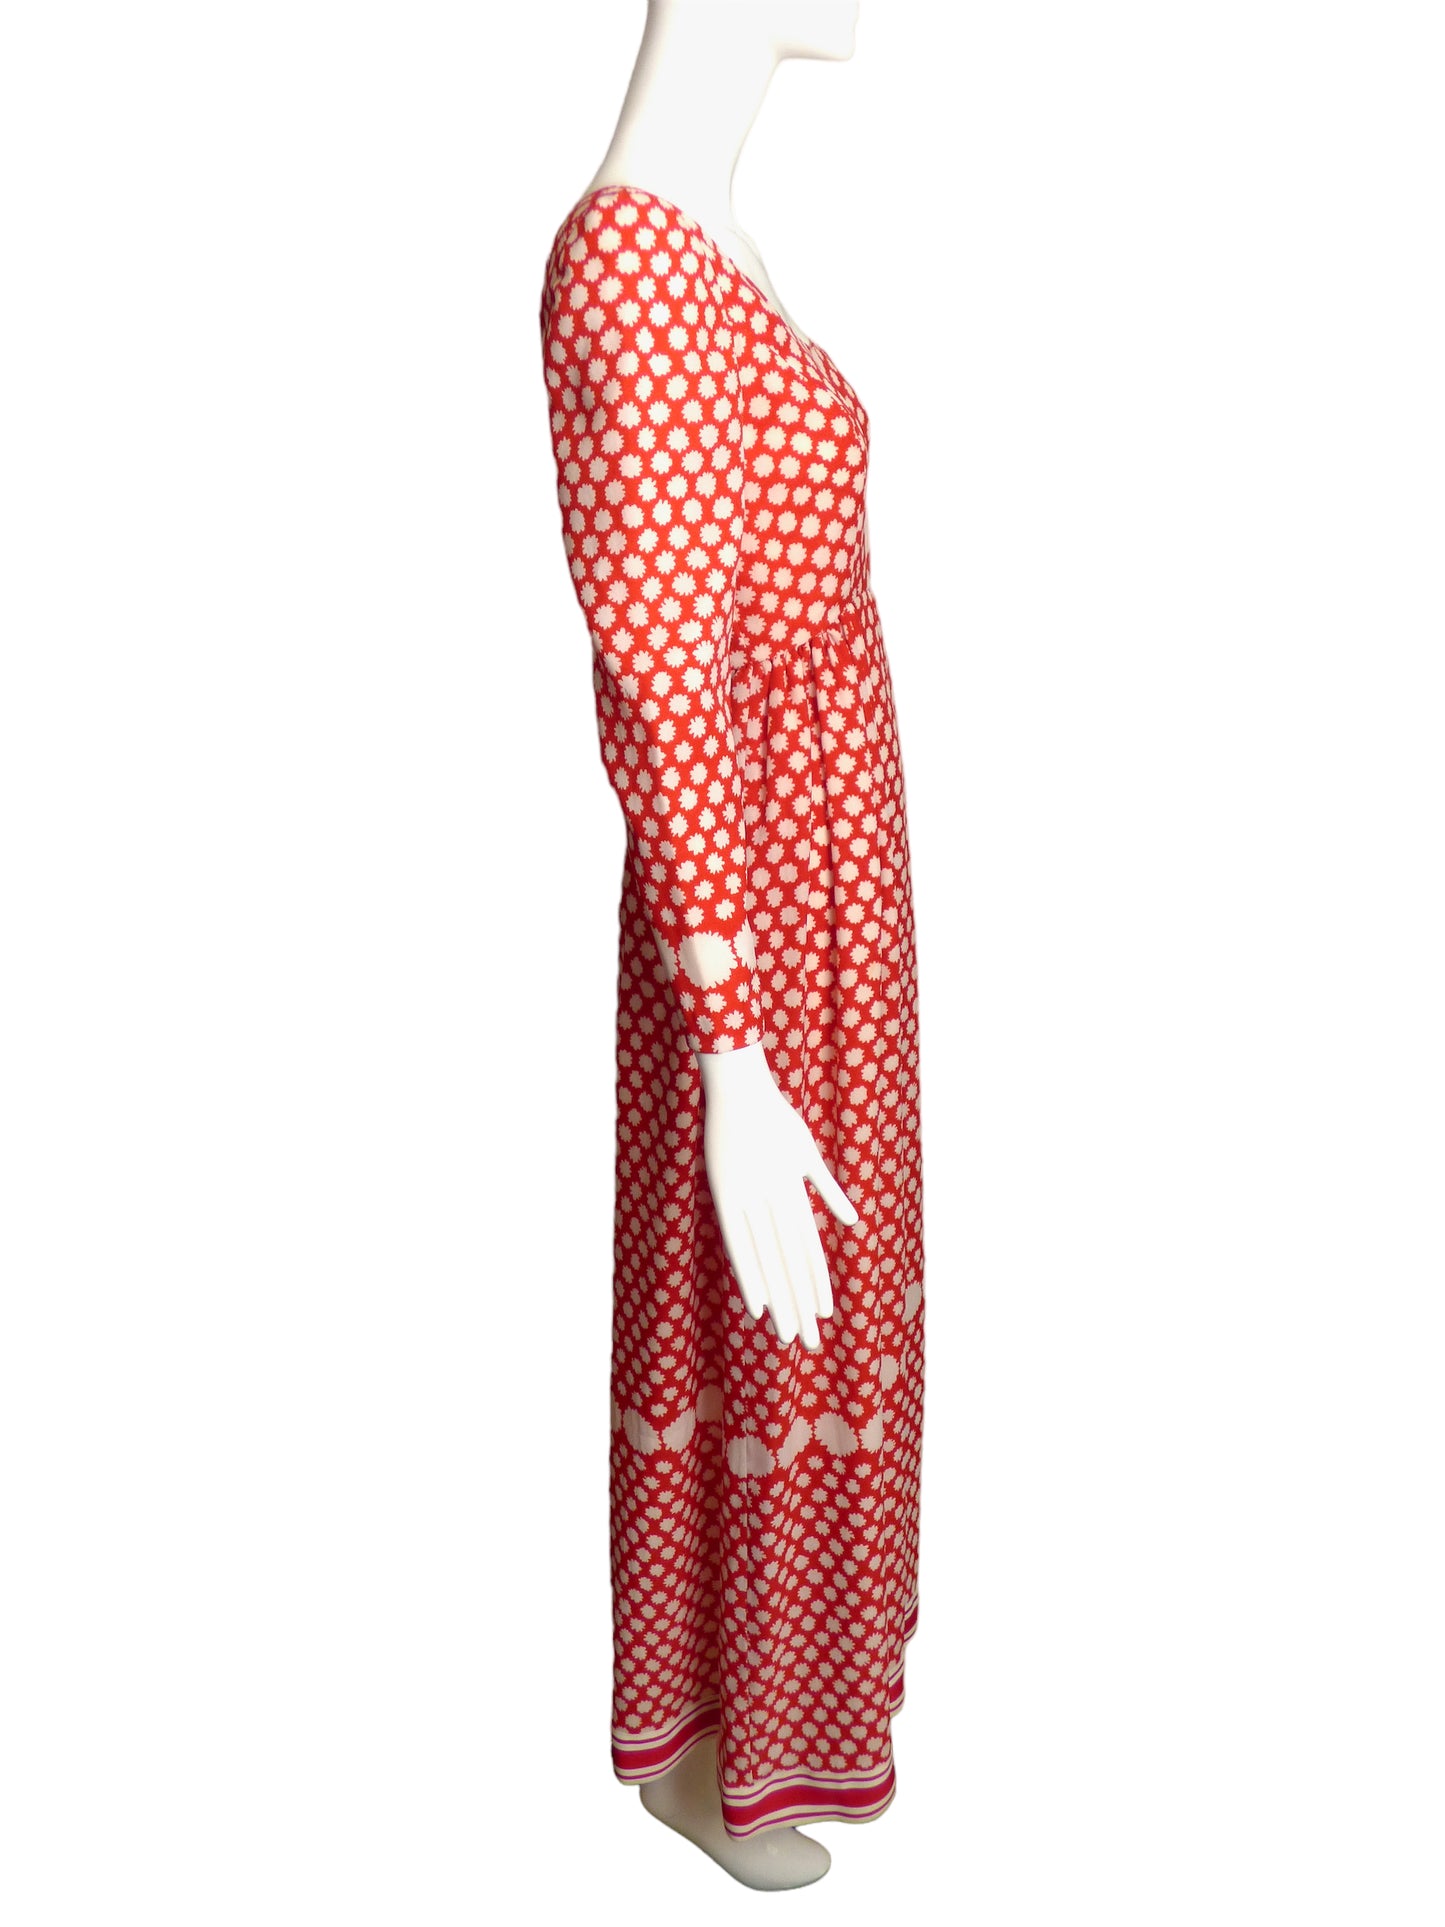 VICTOR COSTA-1970s Red & White Maxi Dress, Size-4